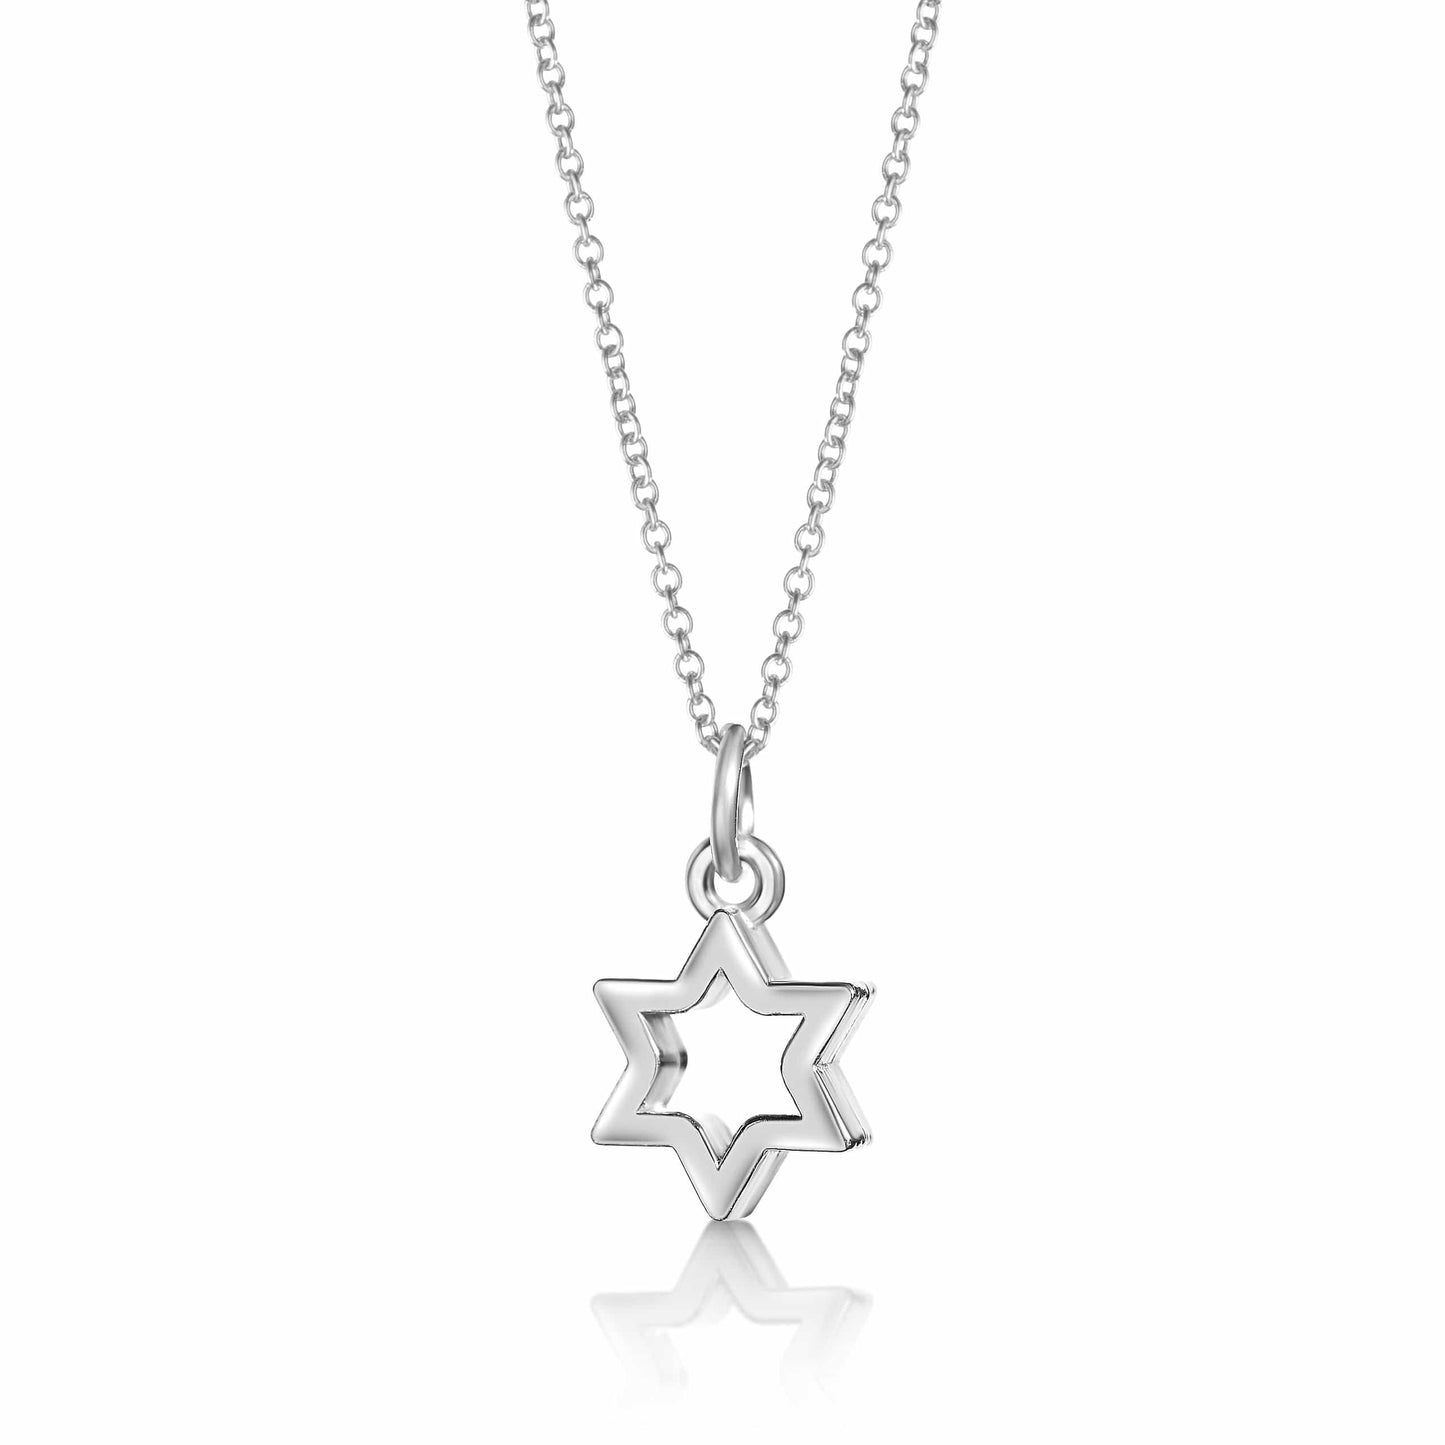 NKL Jewish Star of David Outline Necklace in Silver